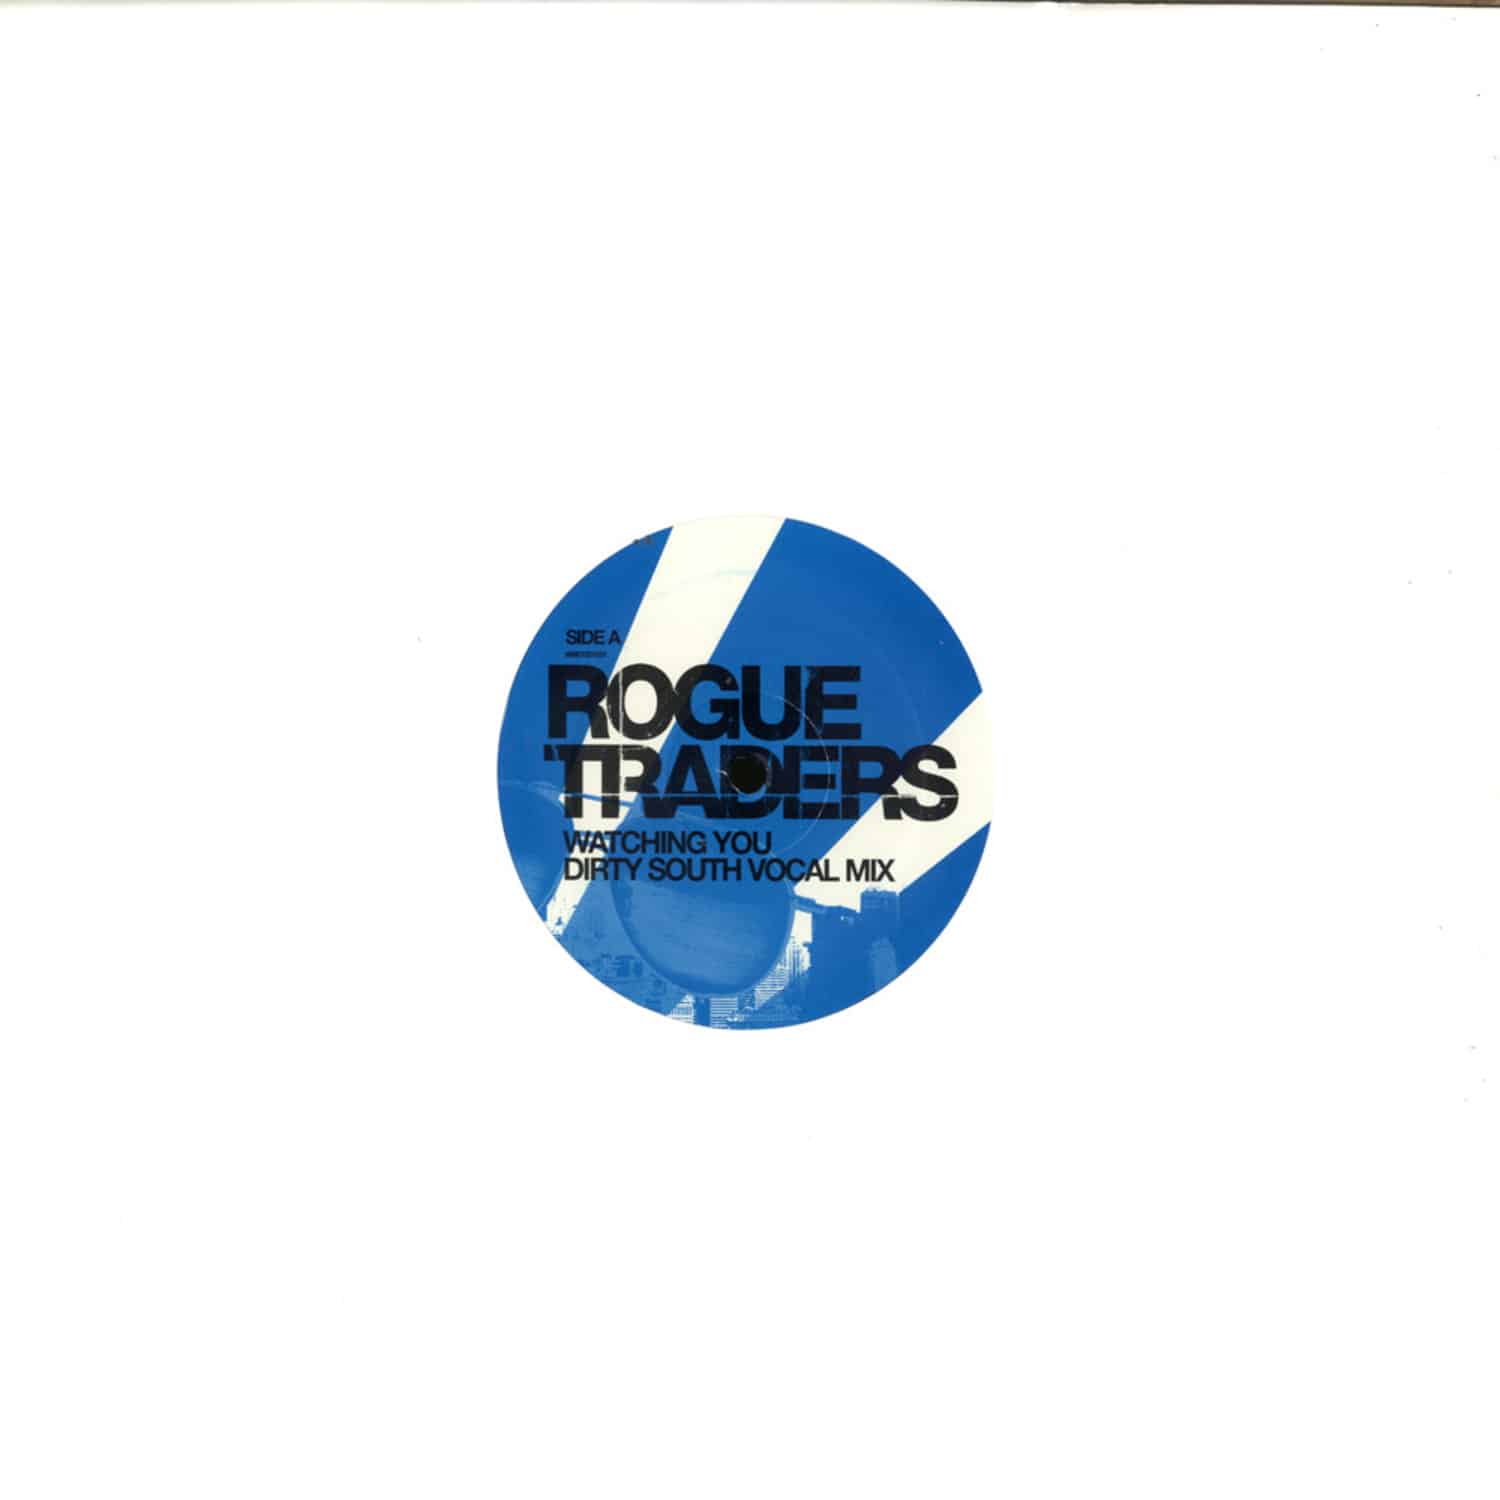 Rough Traders - WATCHING YOU - DIRTY SOUTH RMX